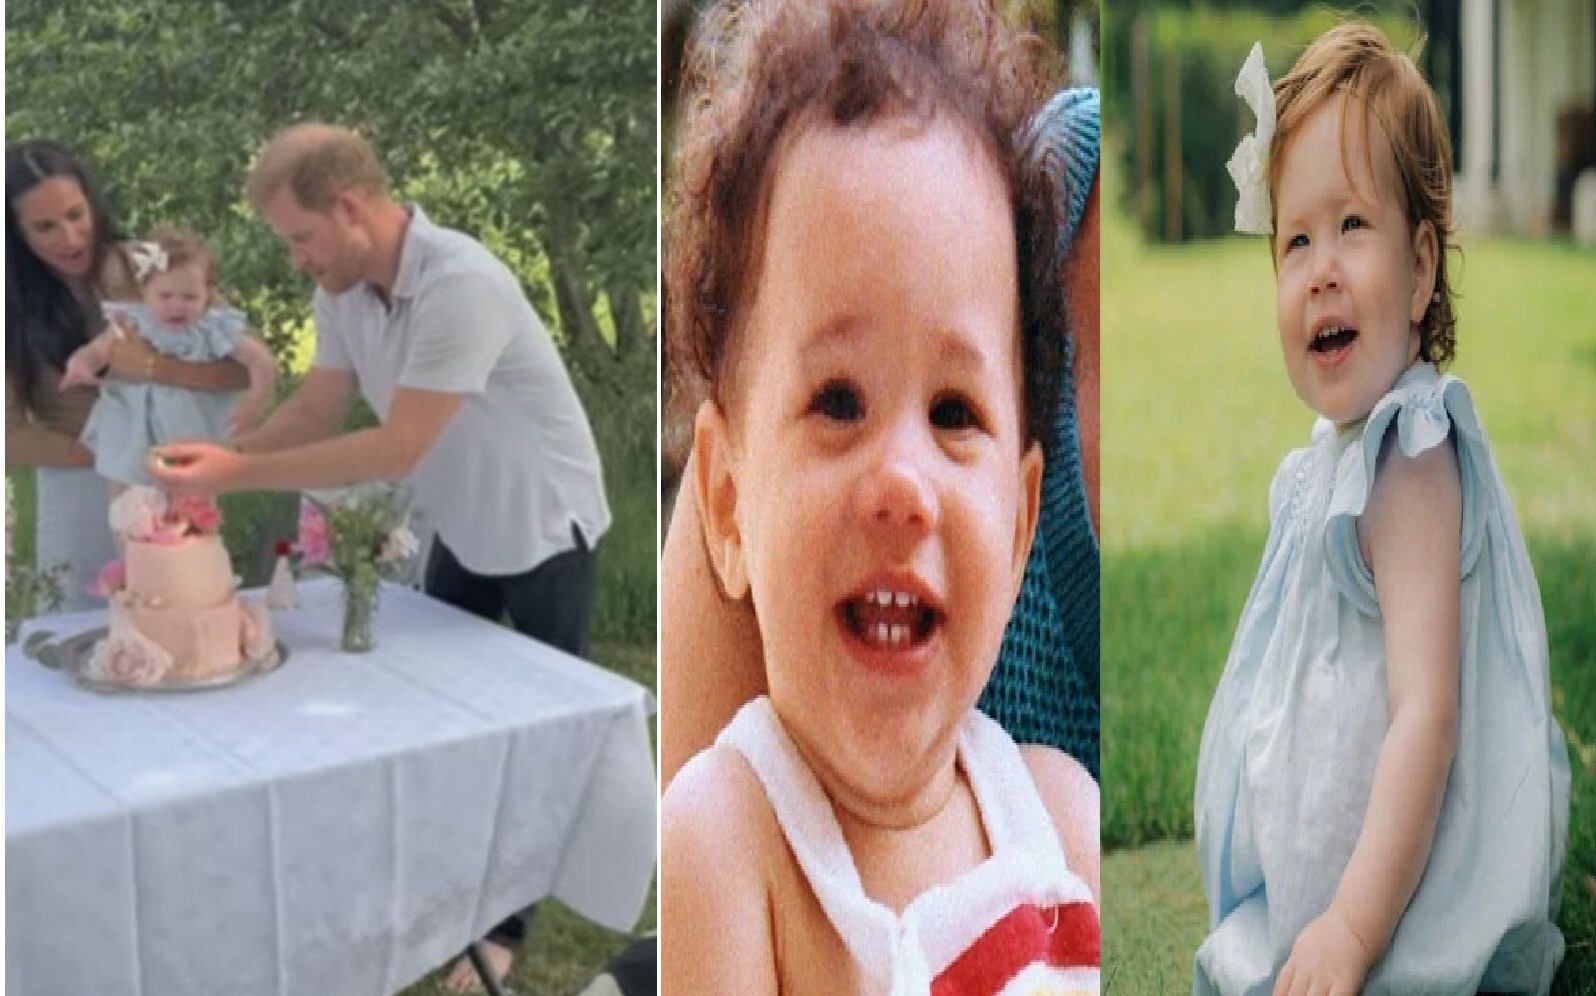 The royal couple Prince Harry and Meghan Markle released a new photo of their daughter Lilibet celebrating her fourth birthday in a backyard of the Frogmore Cottage. Wearing a light blue frock and white bow on her head, the red-haired toddler sat on the grass in a candid snapshot. A highlight of the intimate gathering at Frogmore Cottage in Windsor was a cake by US baker Claire Ptak, who created the wedding cake for the Duke and Duchess of Sussex in 2018.